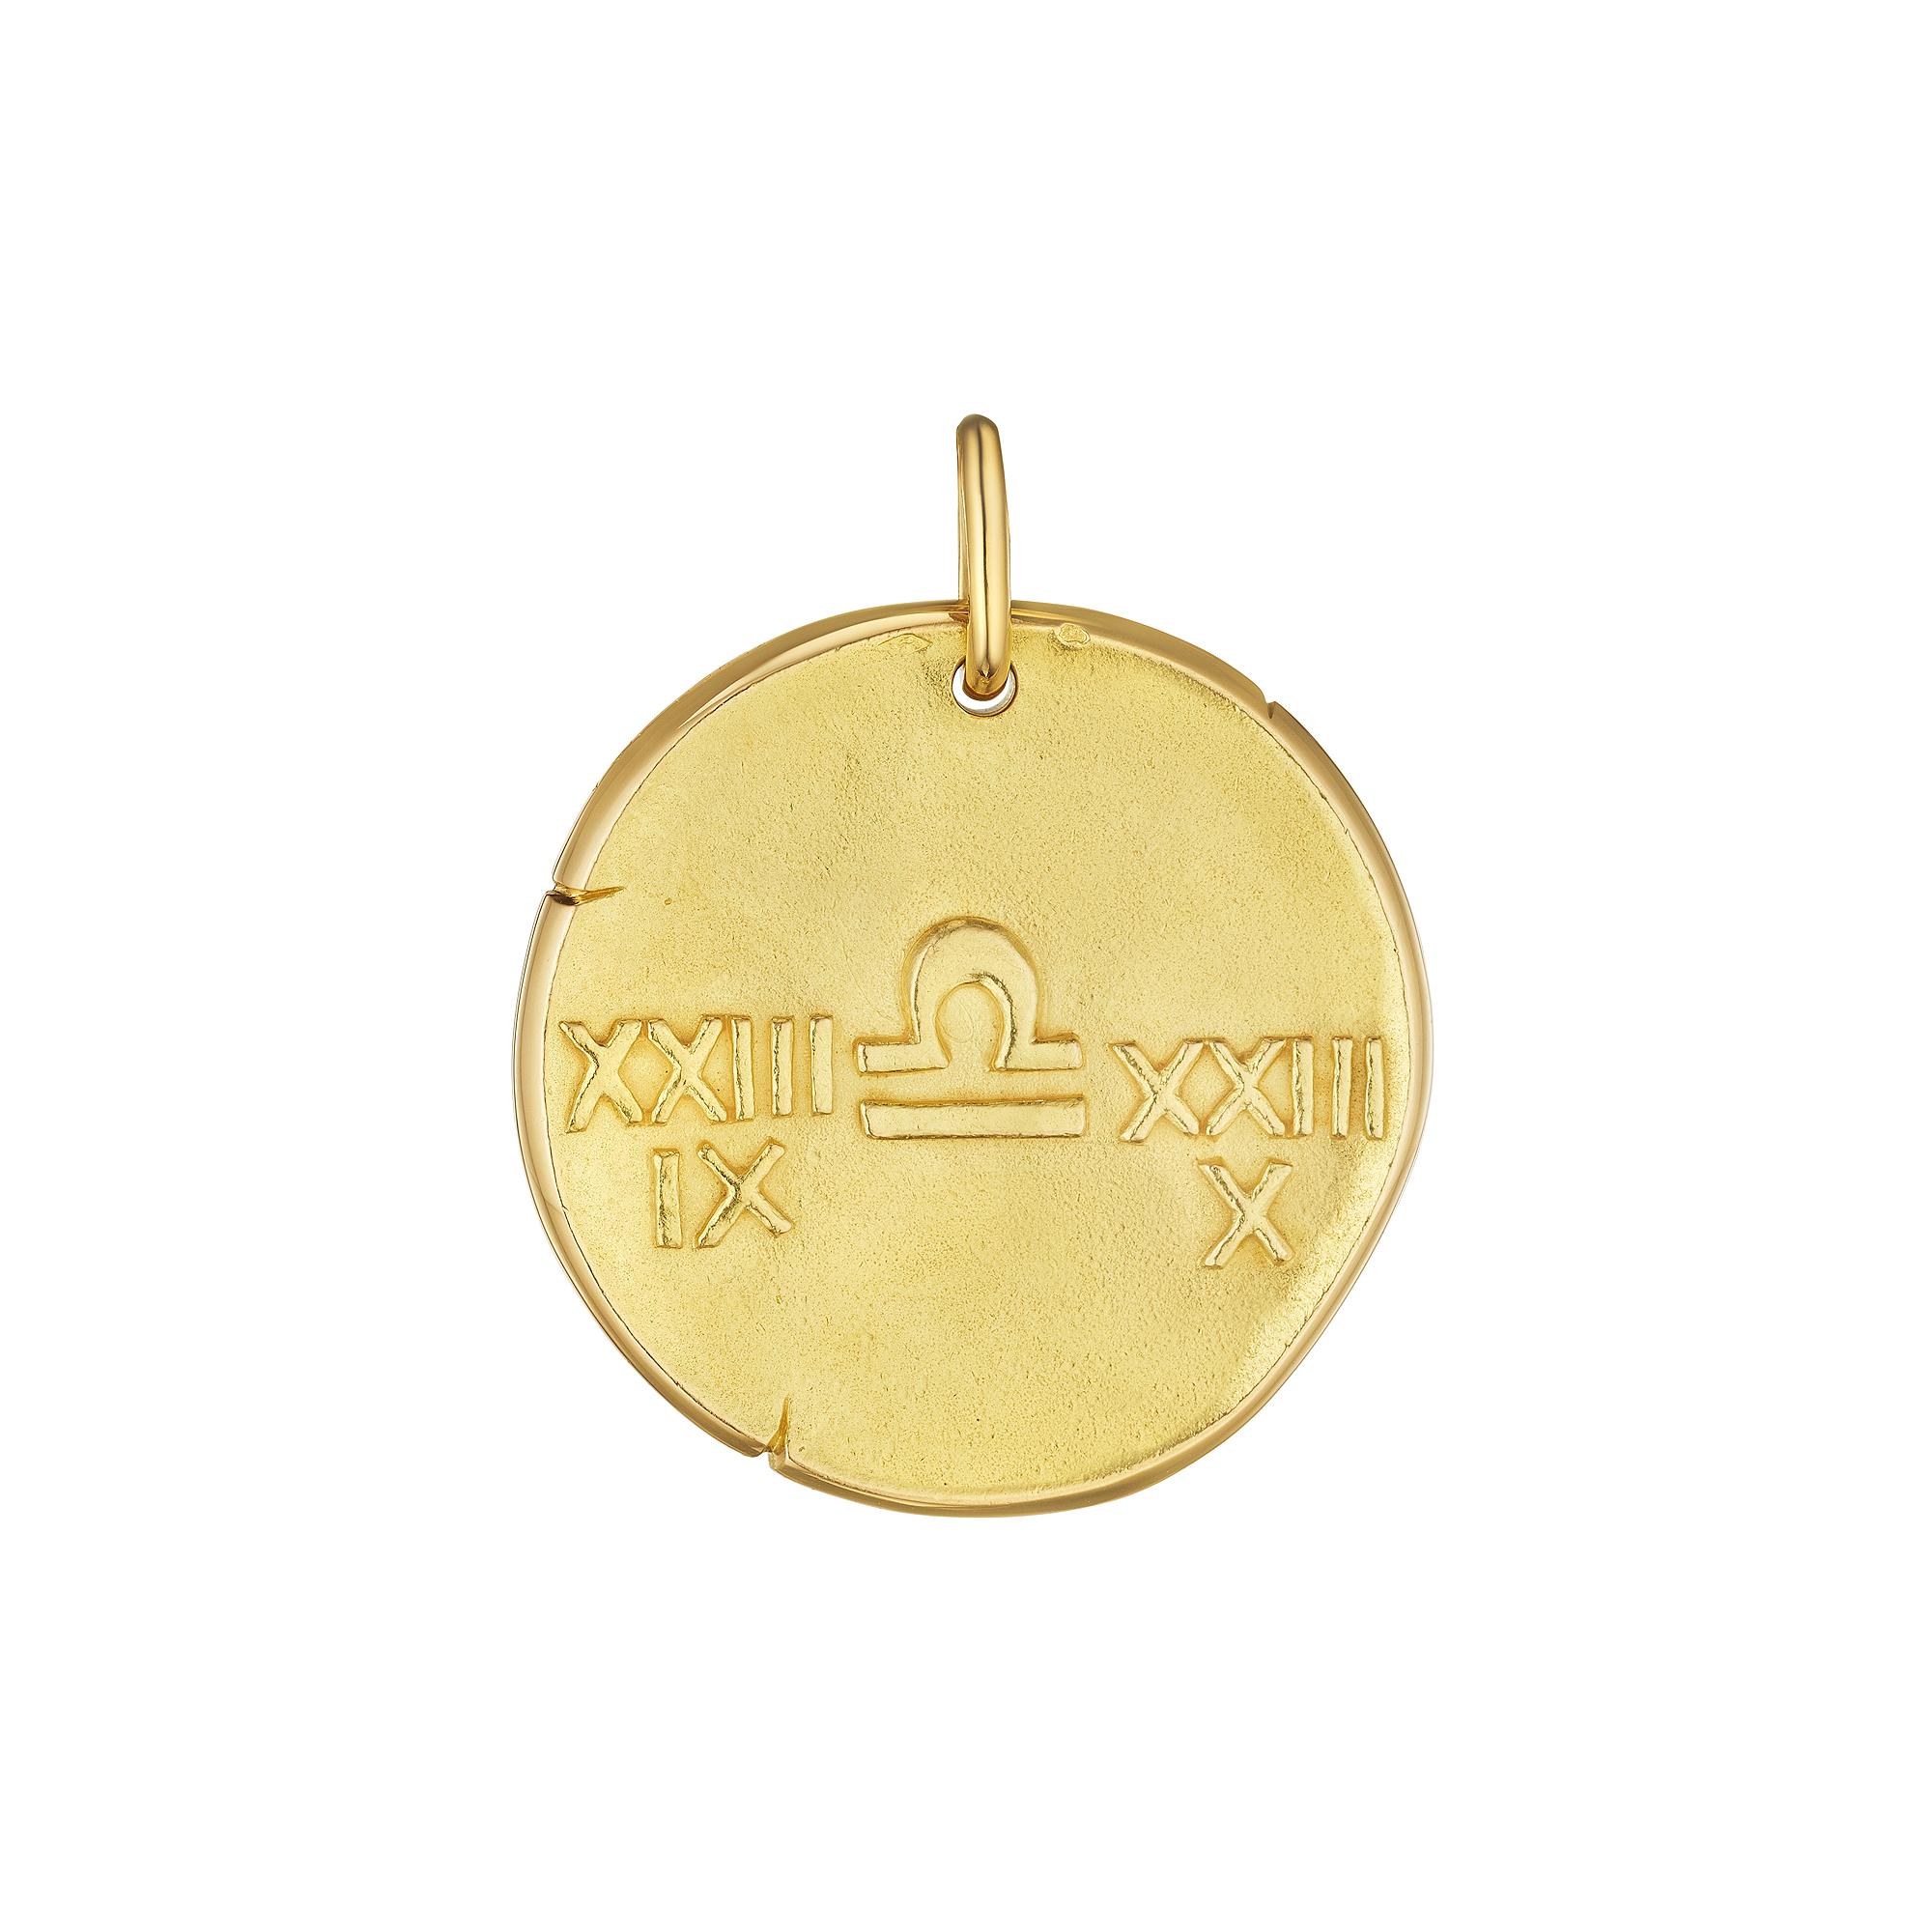 Always be in balance with this large Georges L'Enfant for Van Cleef & Arpels Libra zodiac 18 karat yellow gold modernist disc pendant. Representing those born between September 23-October 22, this strikingly collectible jewel will be on the top of